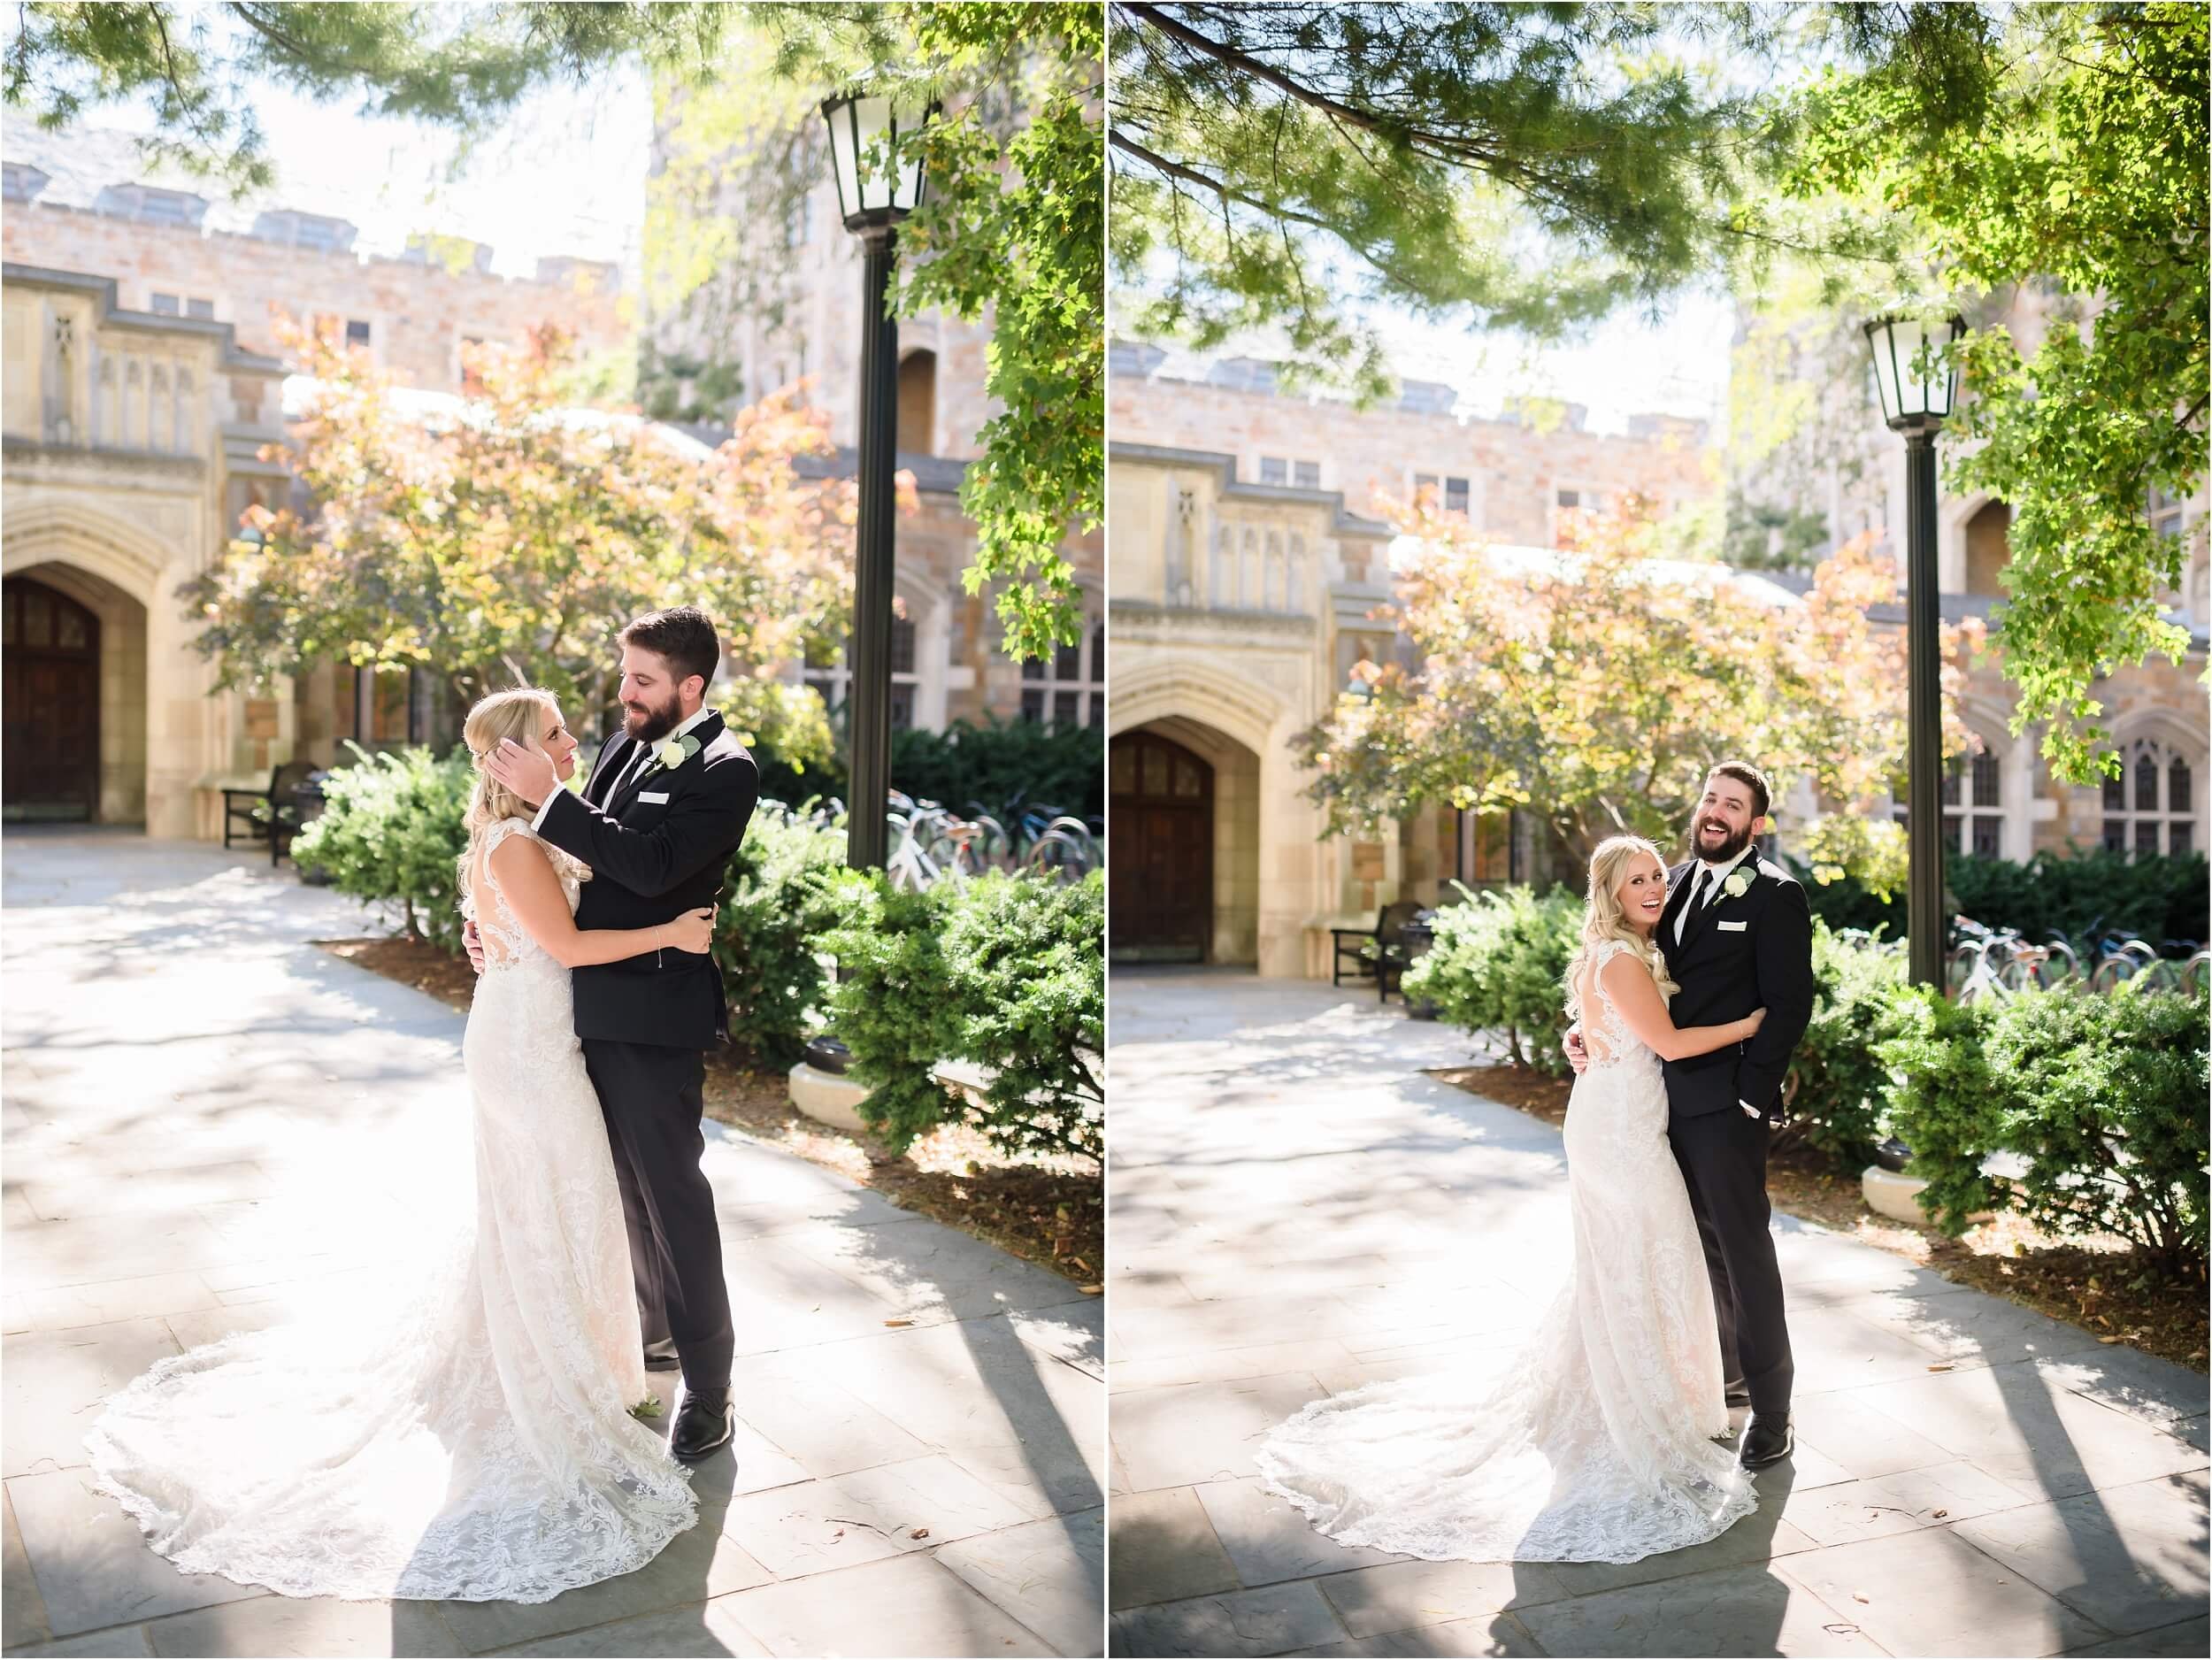  A couple hugs and laughs during their portraits on U of M’s campus in Ann Arbor.  